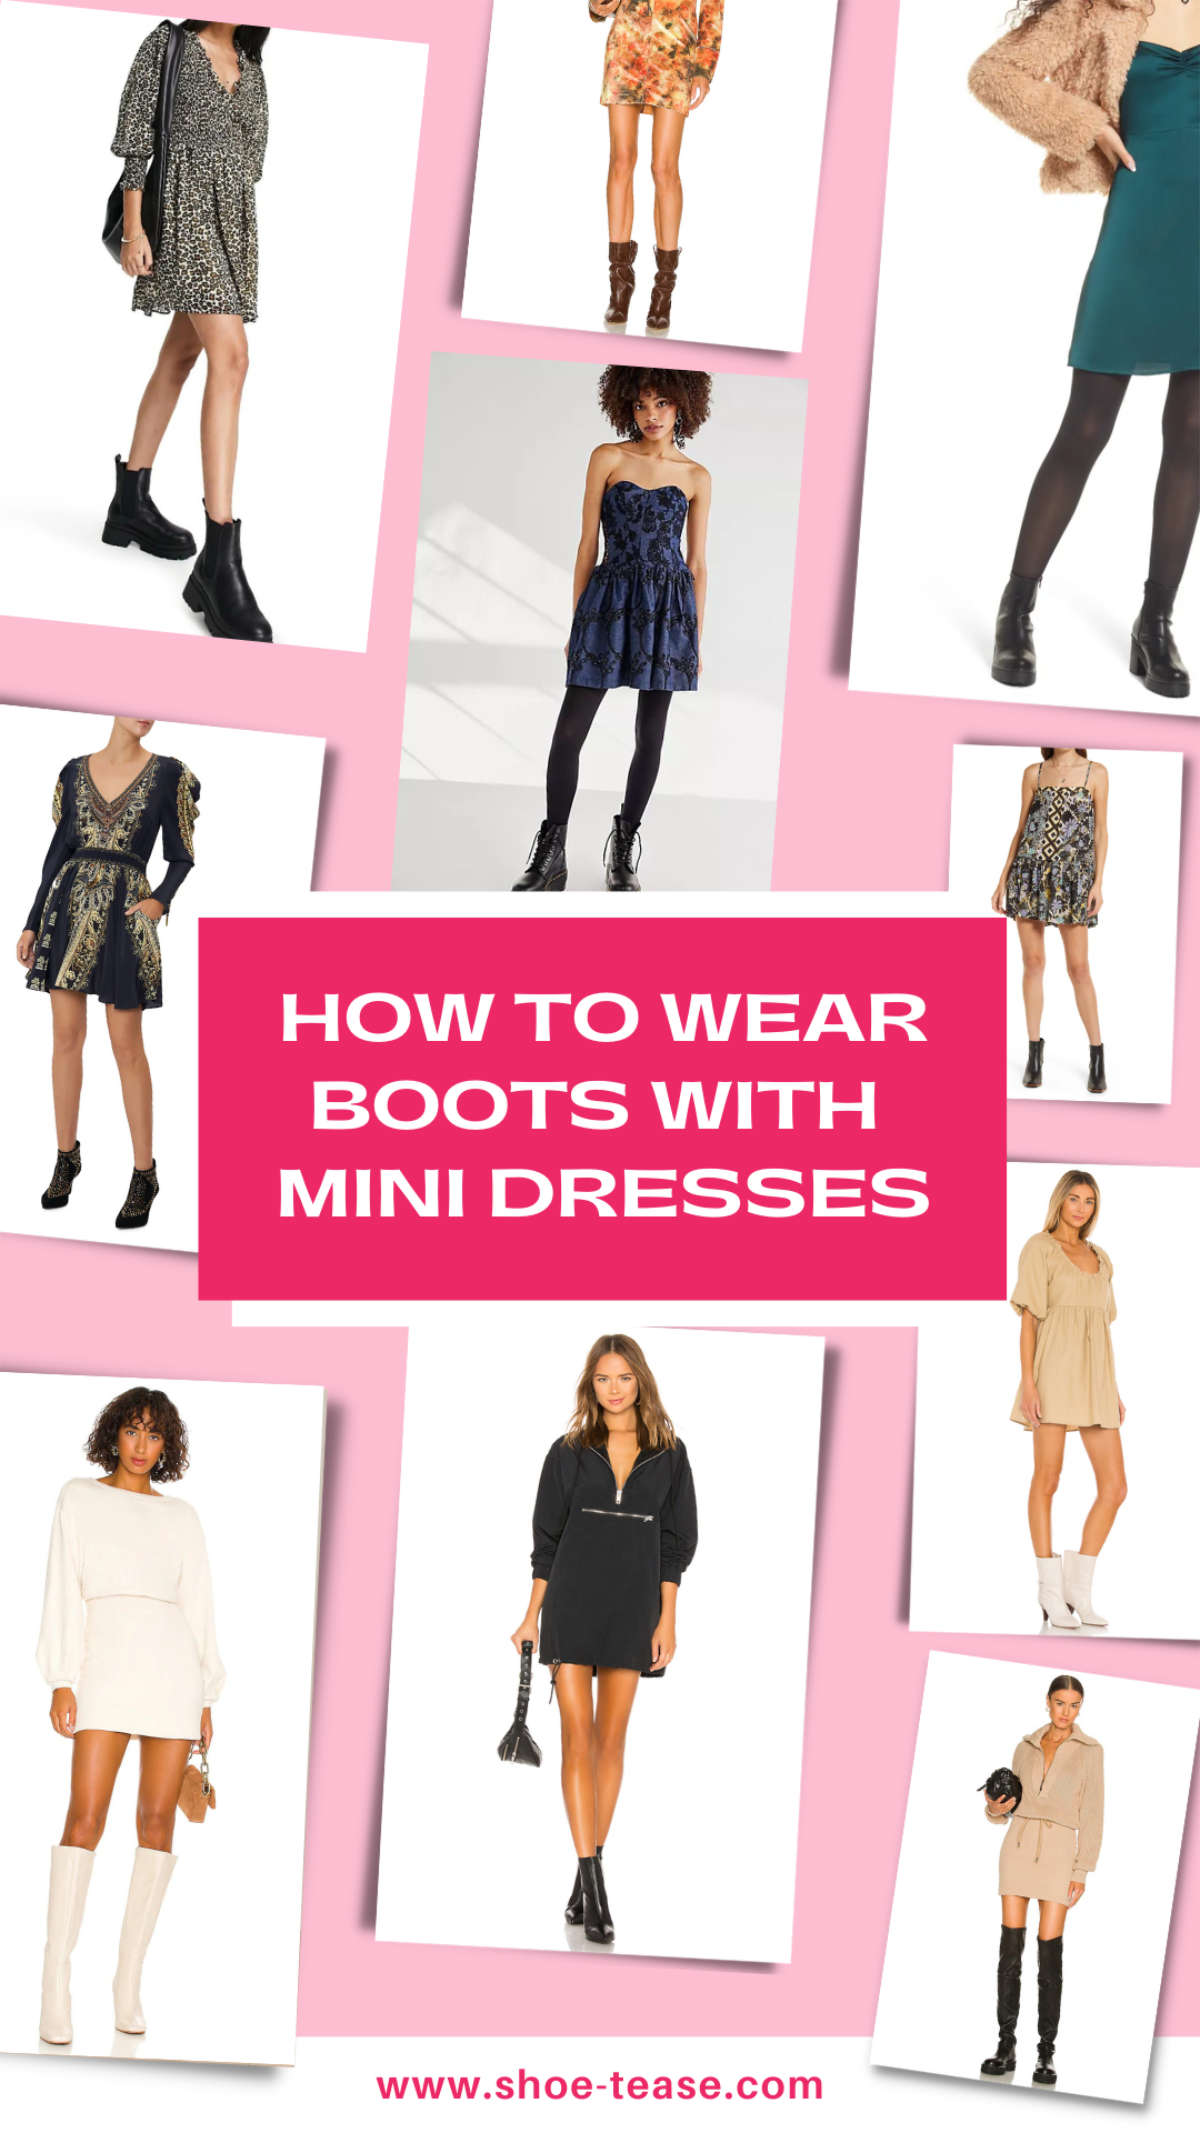 Text reading how to wear boots with mini dresses over collage of various women wearing short dresses with boots.